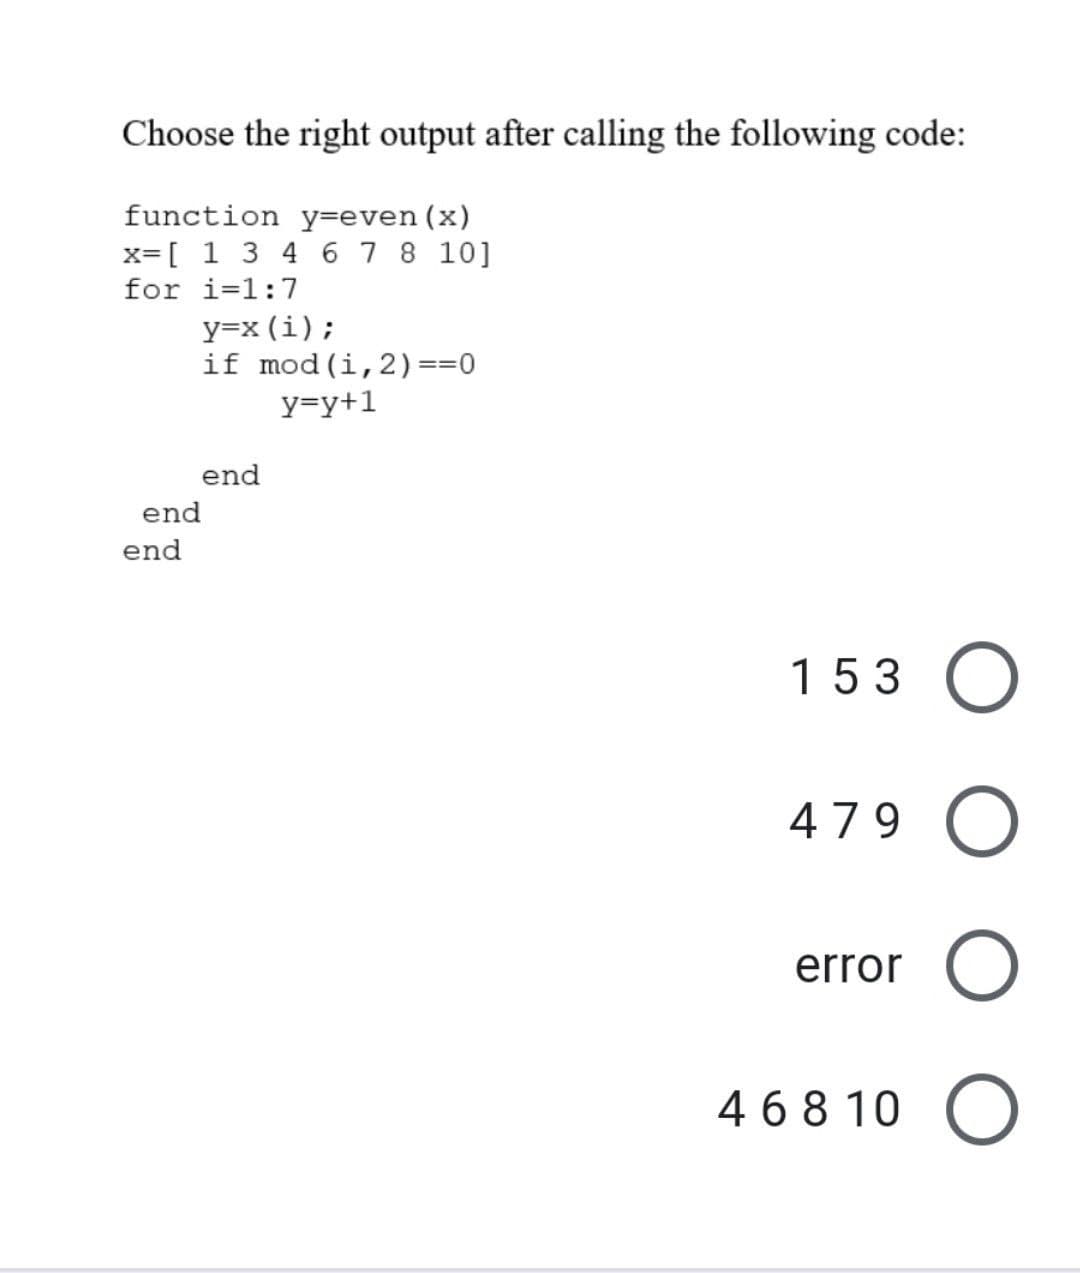 Choose the right output after calling the following code:
function y=even (x)
x= [1 3 4 6 7 8 10]
for i=1:7
y=x (i);
if mod (i, 2) ==0
y=y+1
end
153 O
479 O
error O
46810 O
end
end